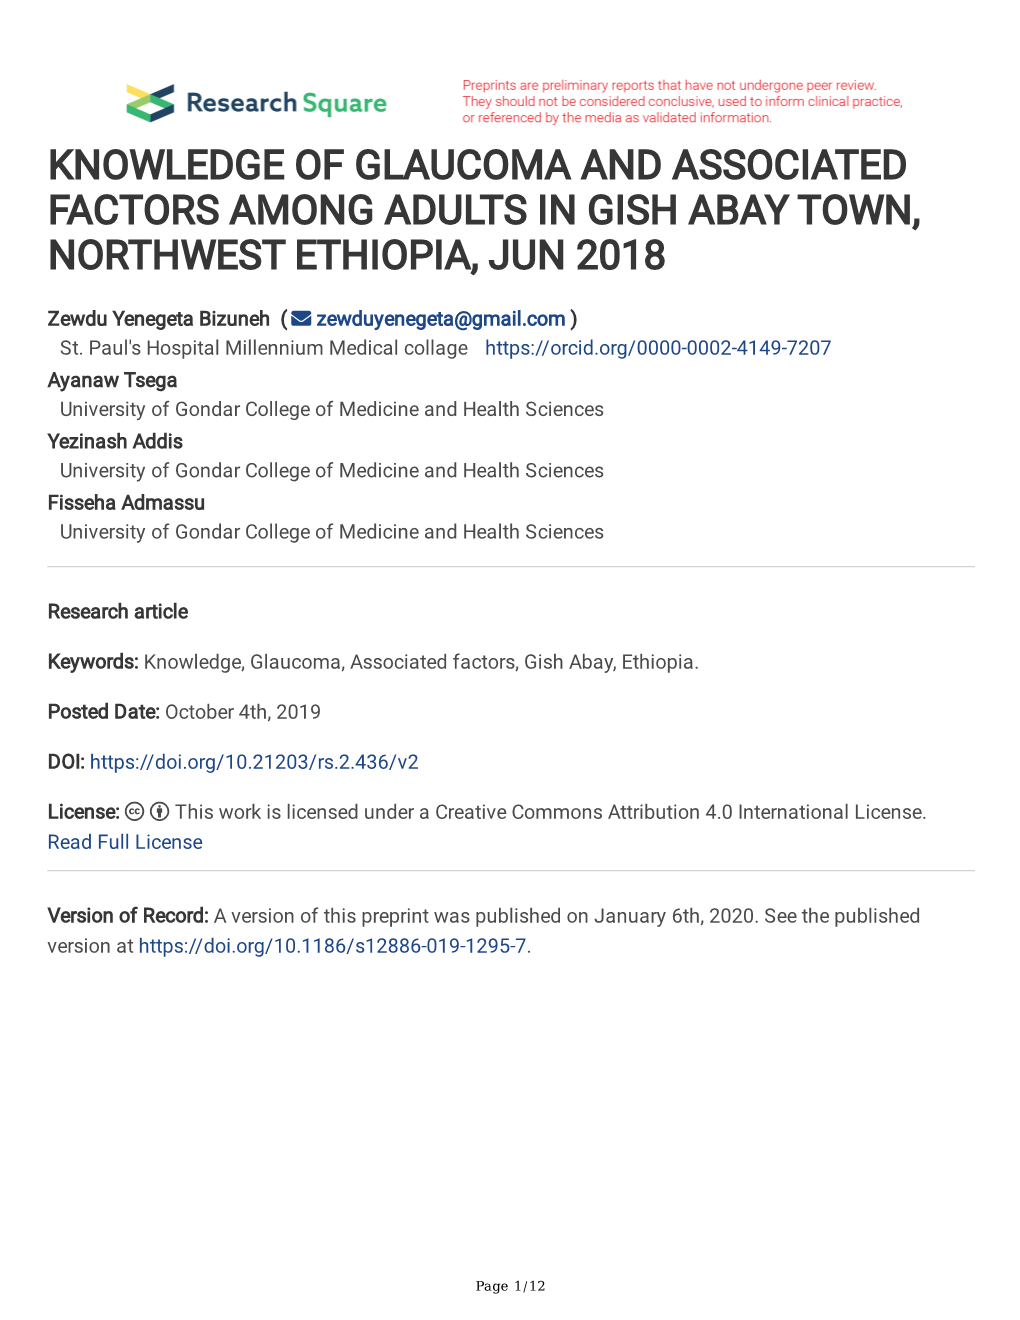 Knowledge of Glaucoma and Associated Factors Among Adults in Gish Abay Town, Northwest Ethiopia, Jun 2018